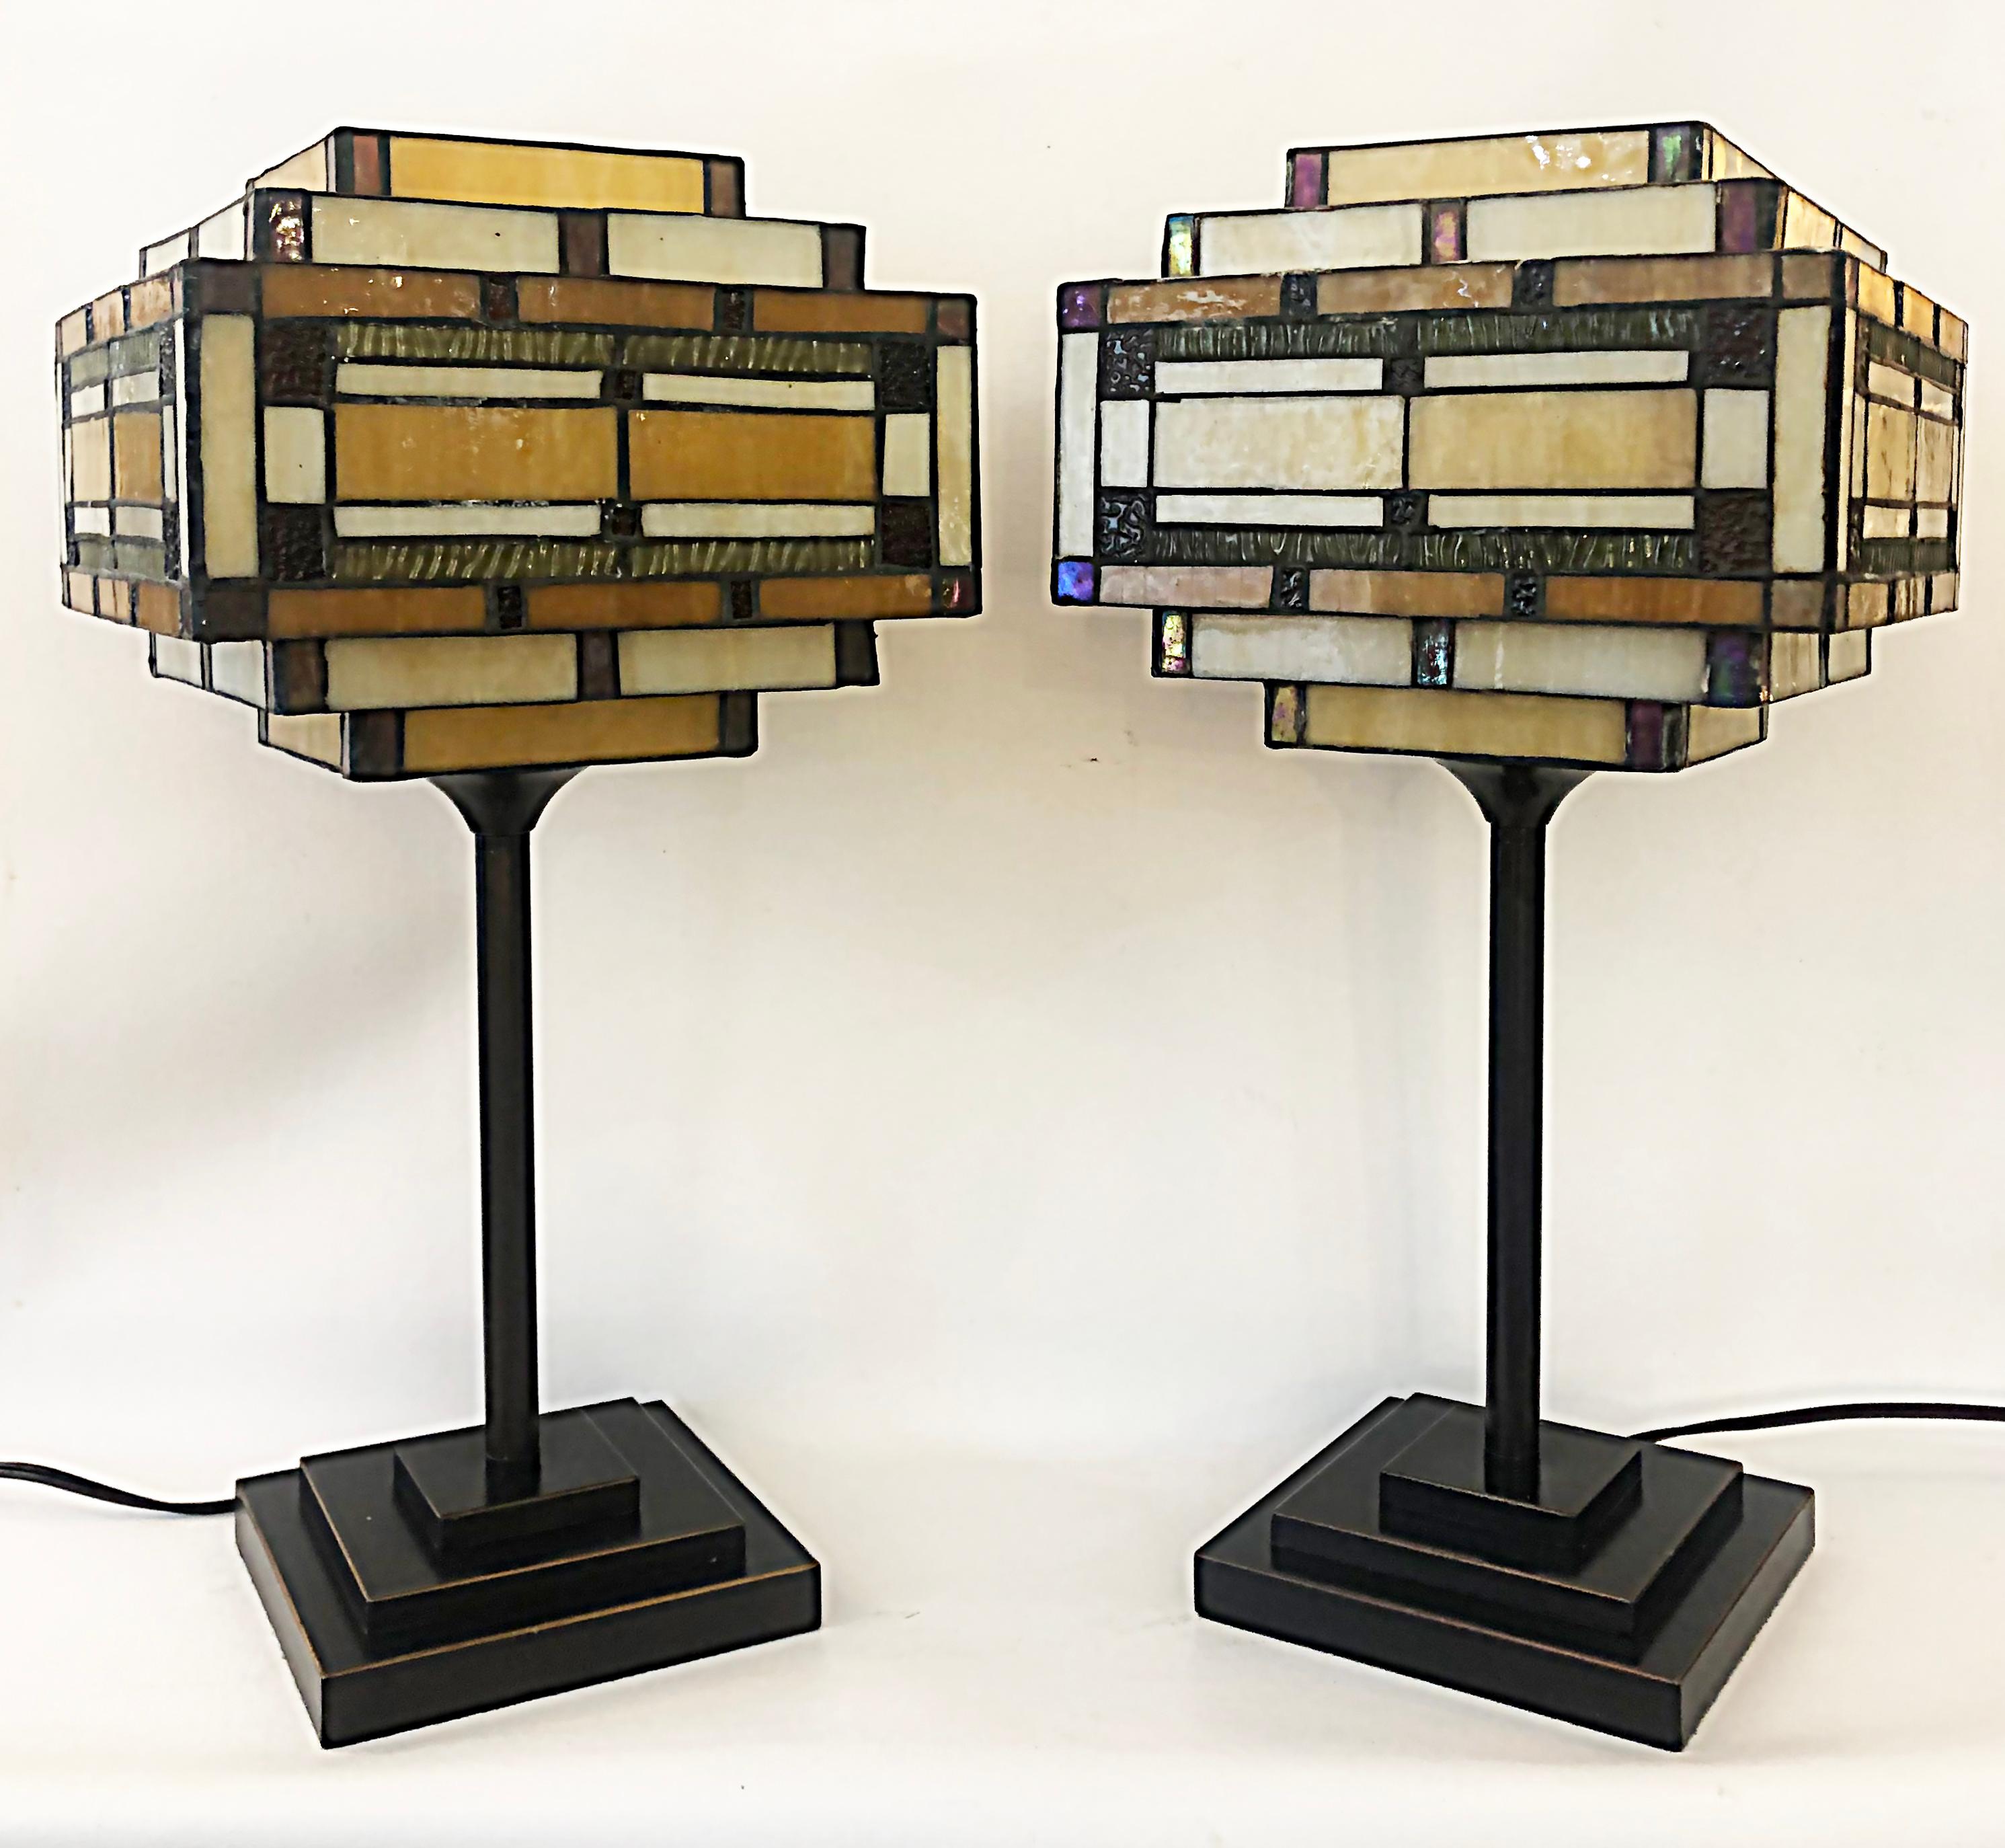 Arts & Crafts Style table lamps with stained glass shades, patinated metal bases

Offered for sale is a pair of modern Arts & Crafts style table lamps with stained glass shades. The lamps have a Frank Lloyd Wright influence with both the glass and